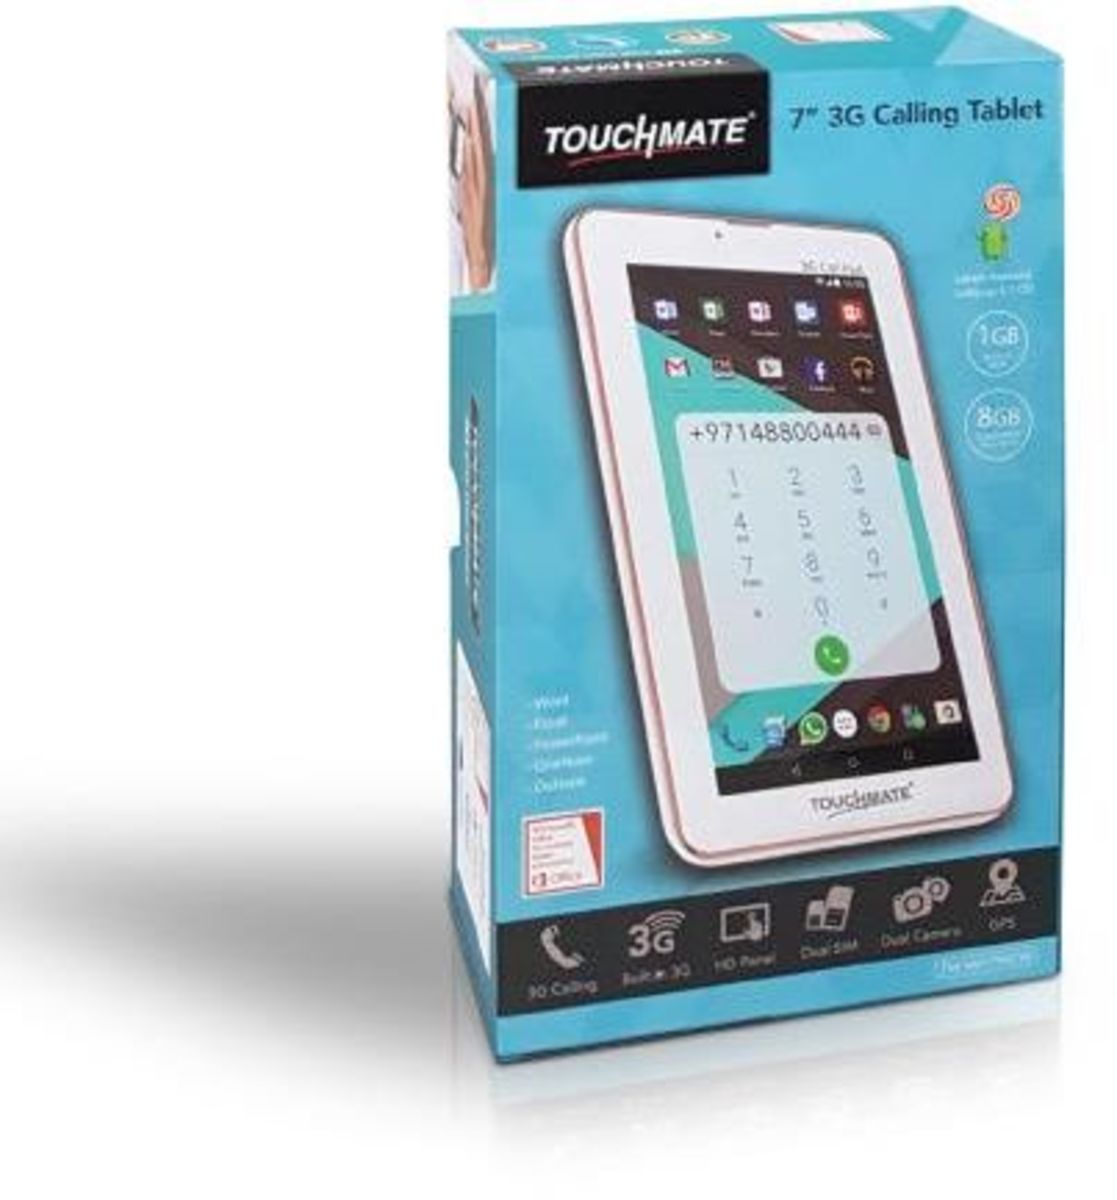 Touchmate Tab MID795 7.0inch 8GB 3G White